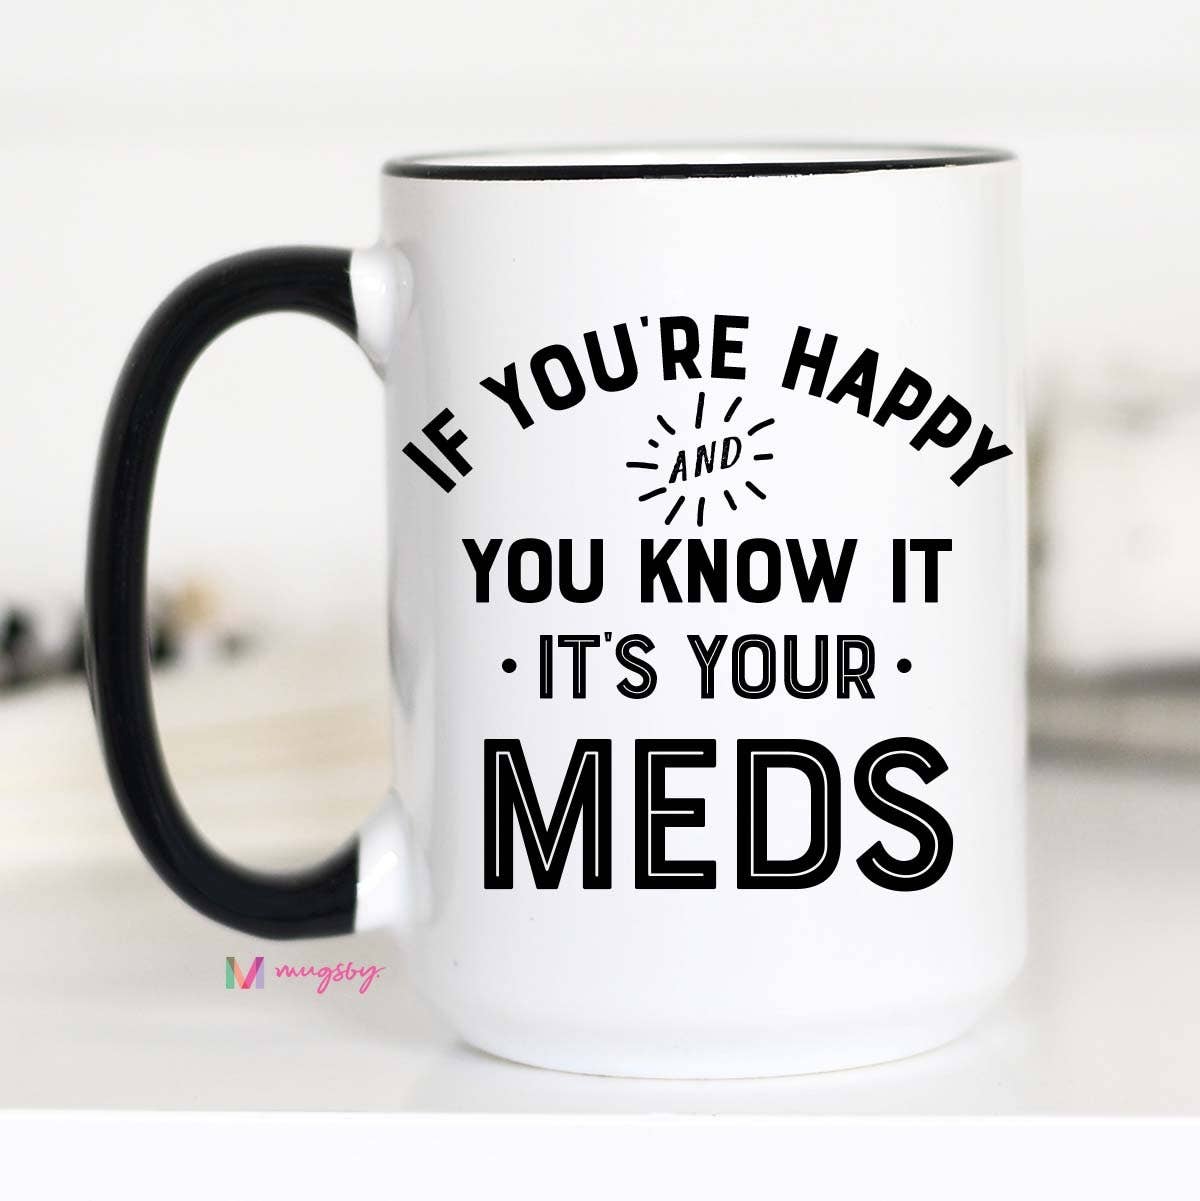 If You're Happy and you Know it It's your Meds Mug